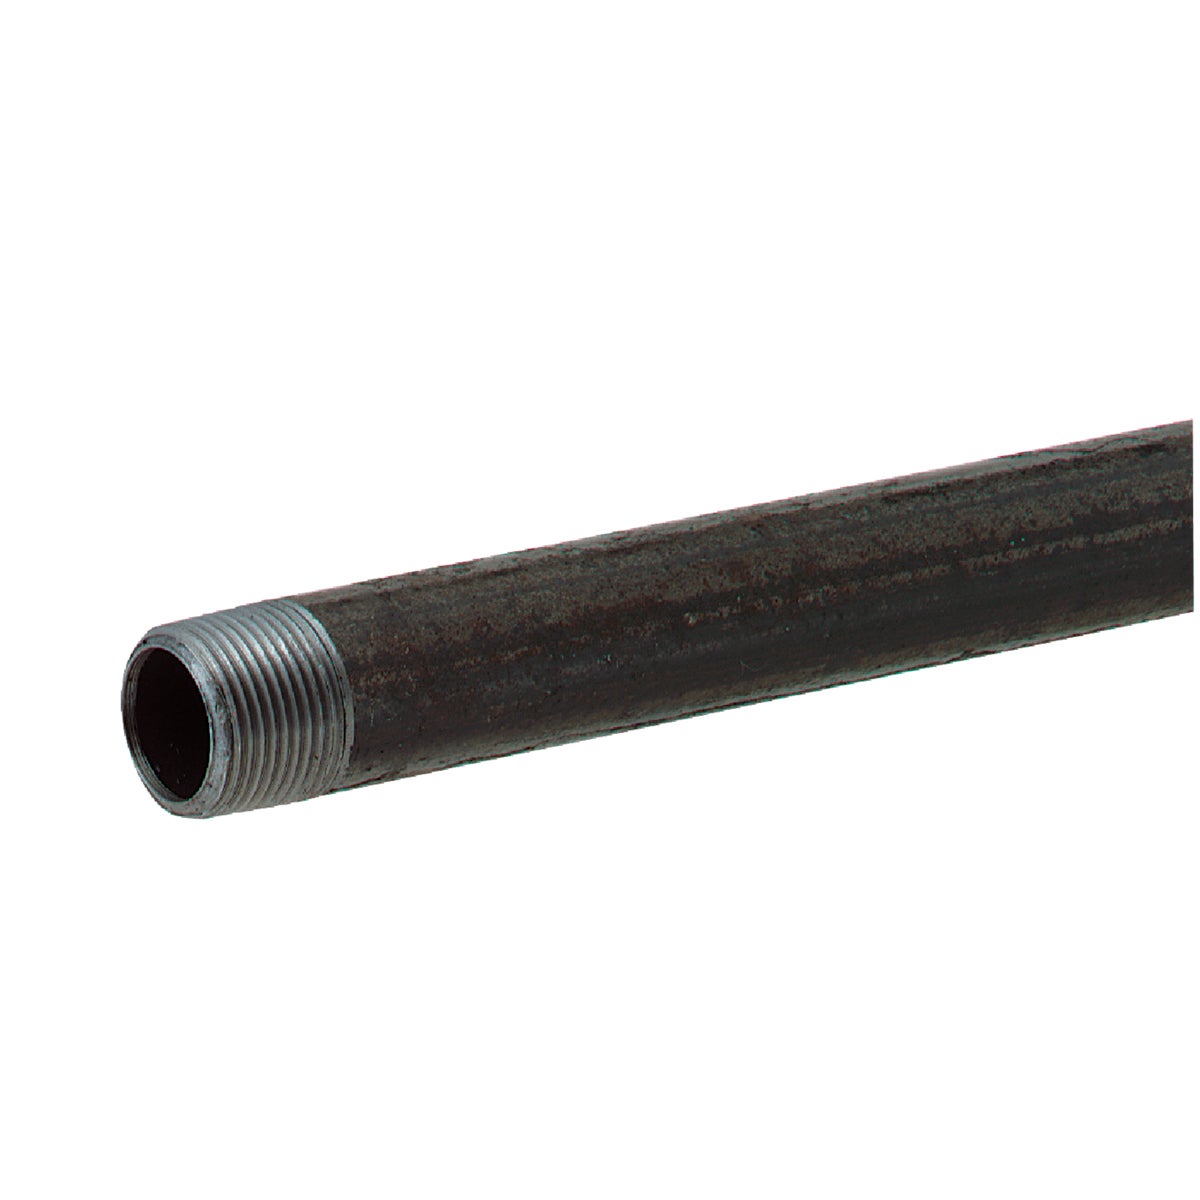 Southland 1-1/2 In. x 18 In. Carbon Steel Threaded Black Pipe